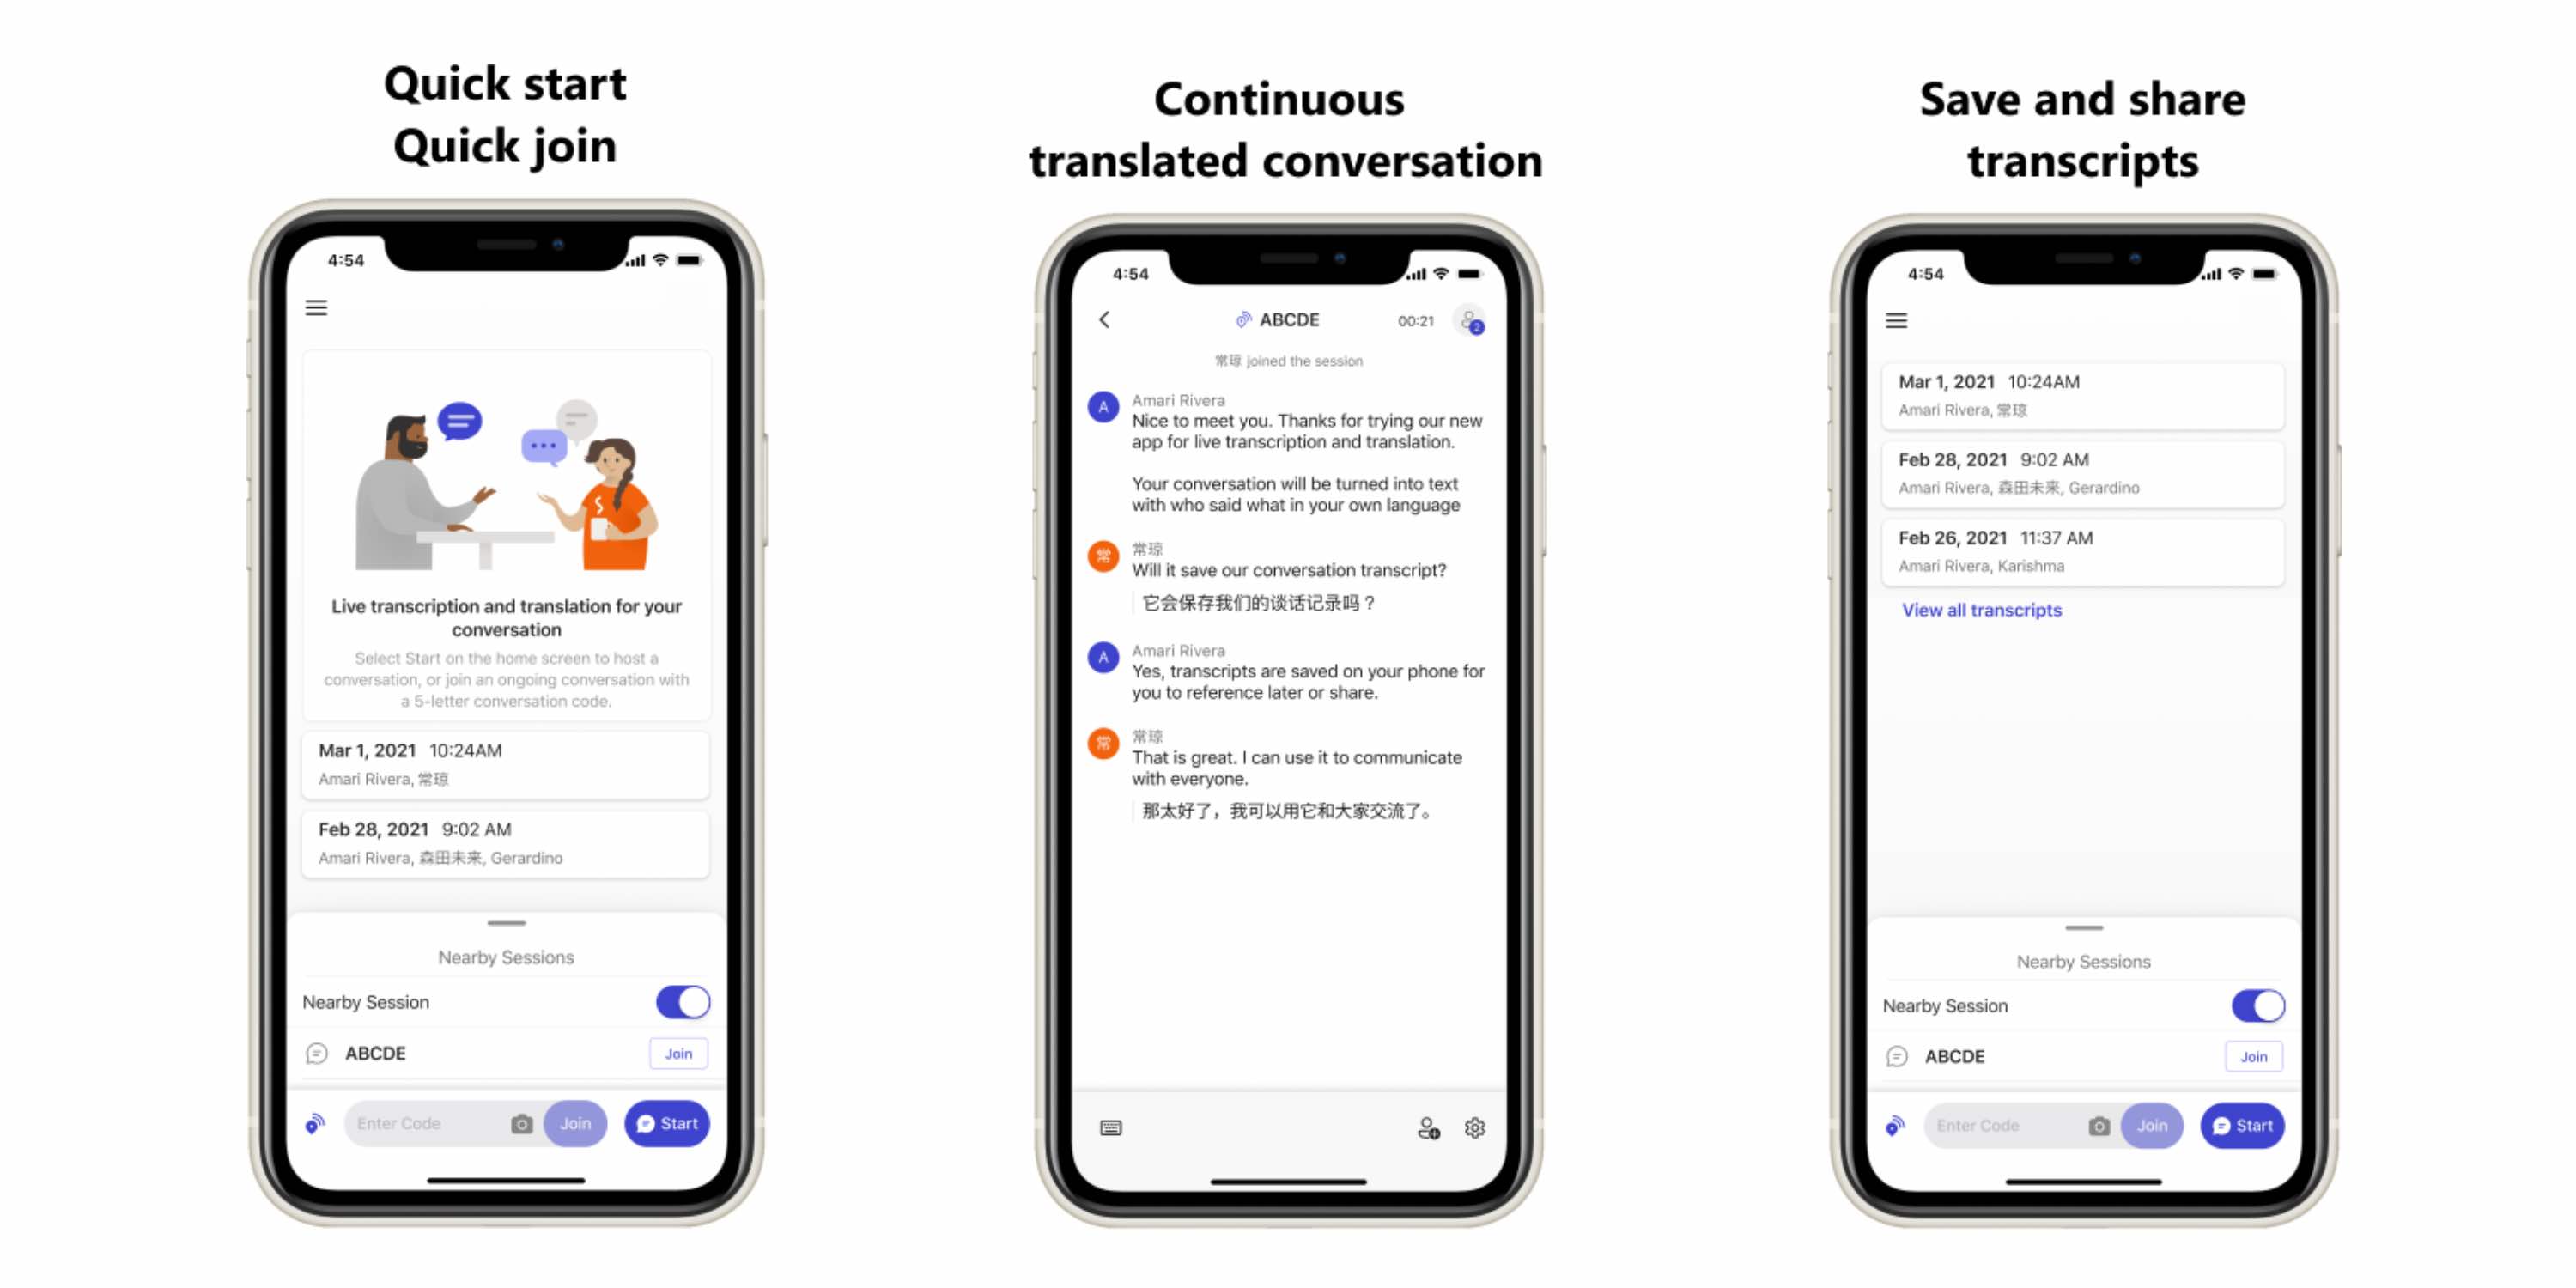 download the new version for apple Transcribe 9.30